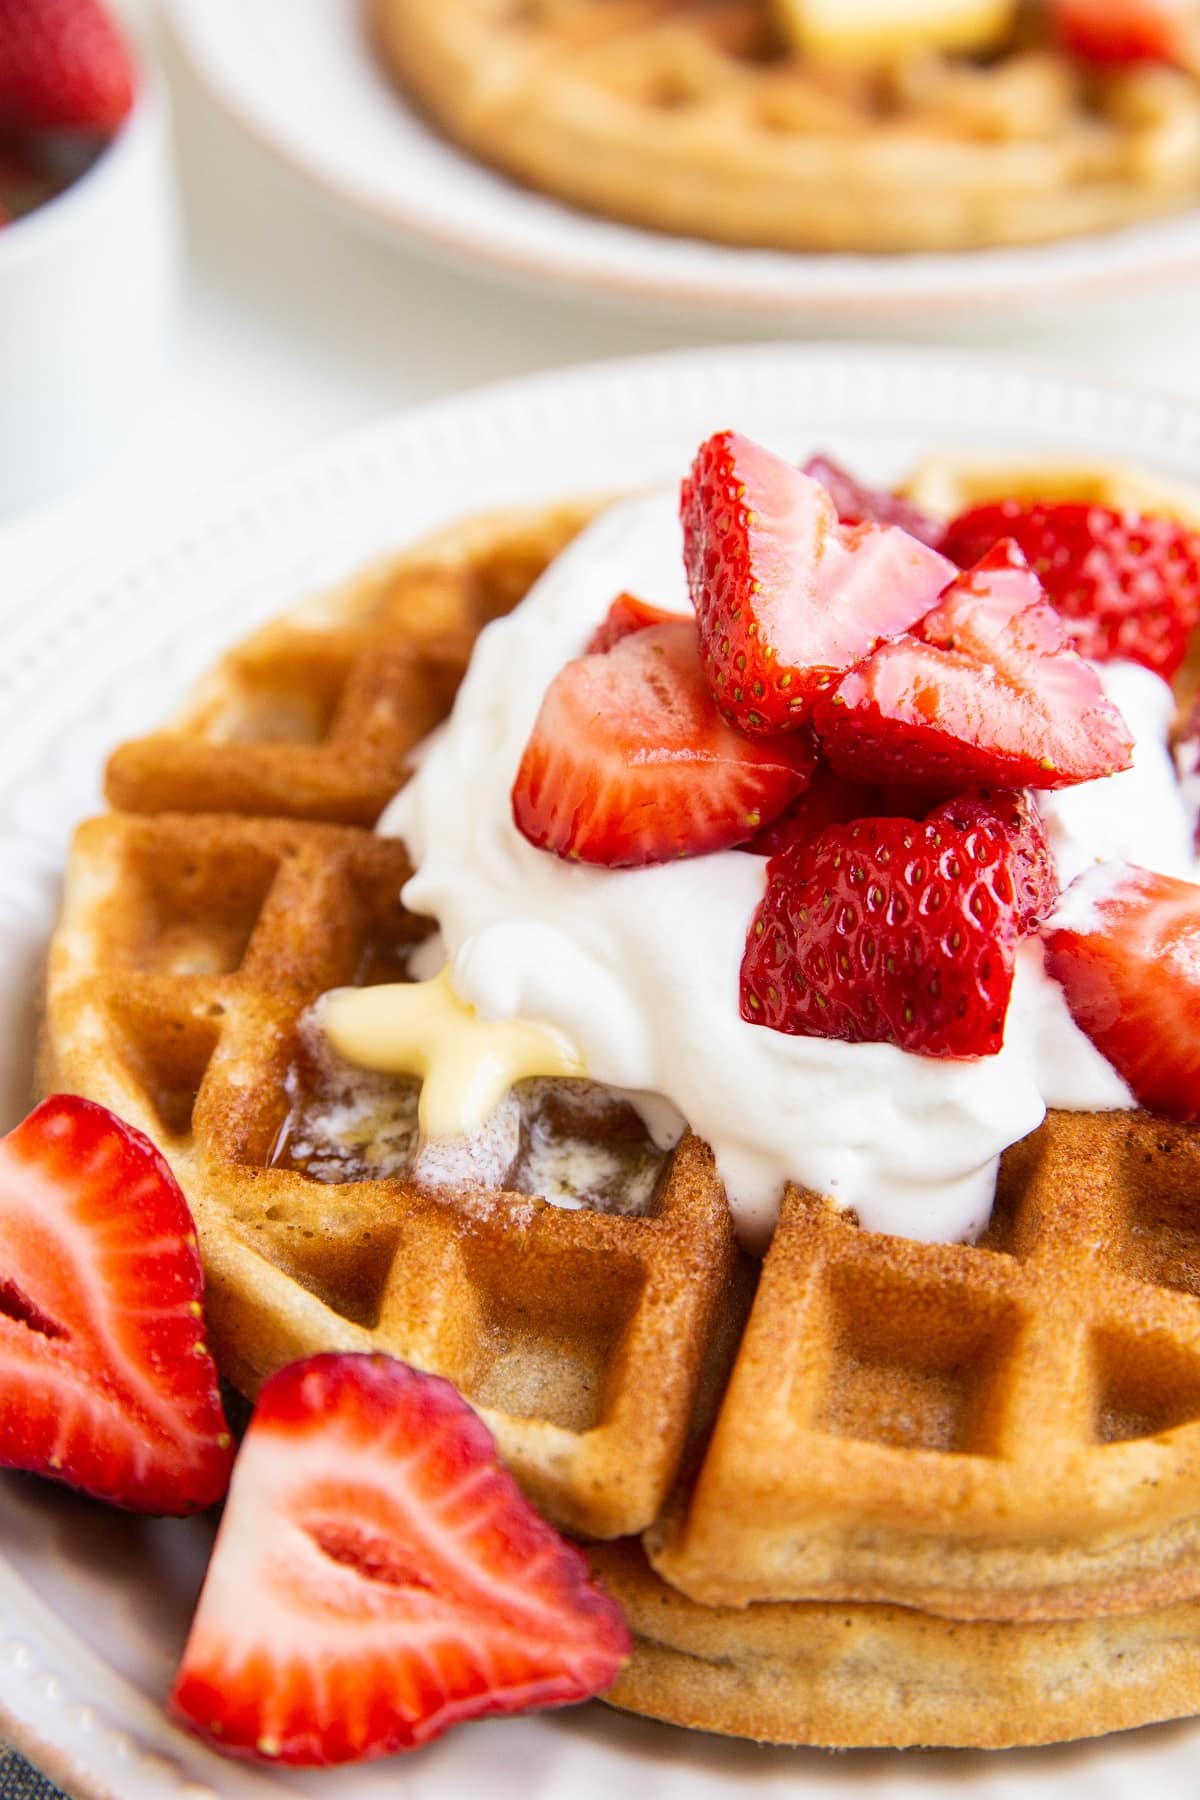 Double Waffle Bowl Maker, Make bowl shapes Belgian waffles for serving ice  cream